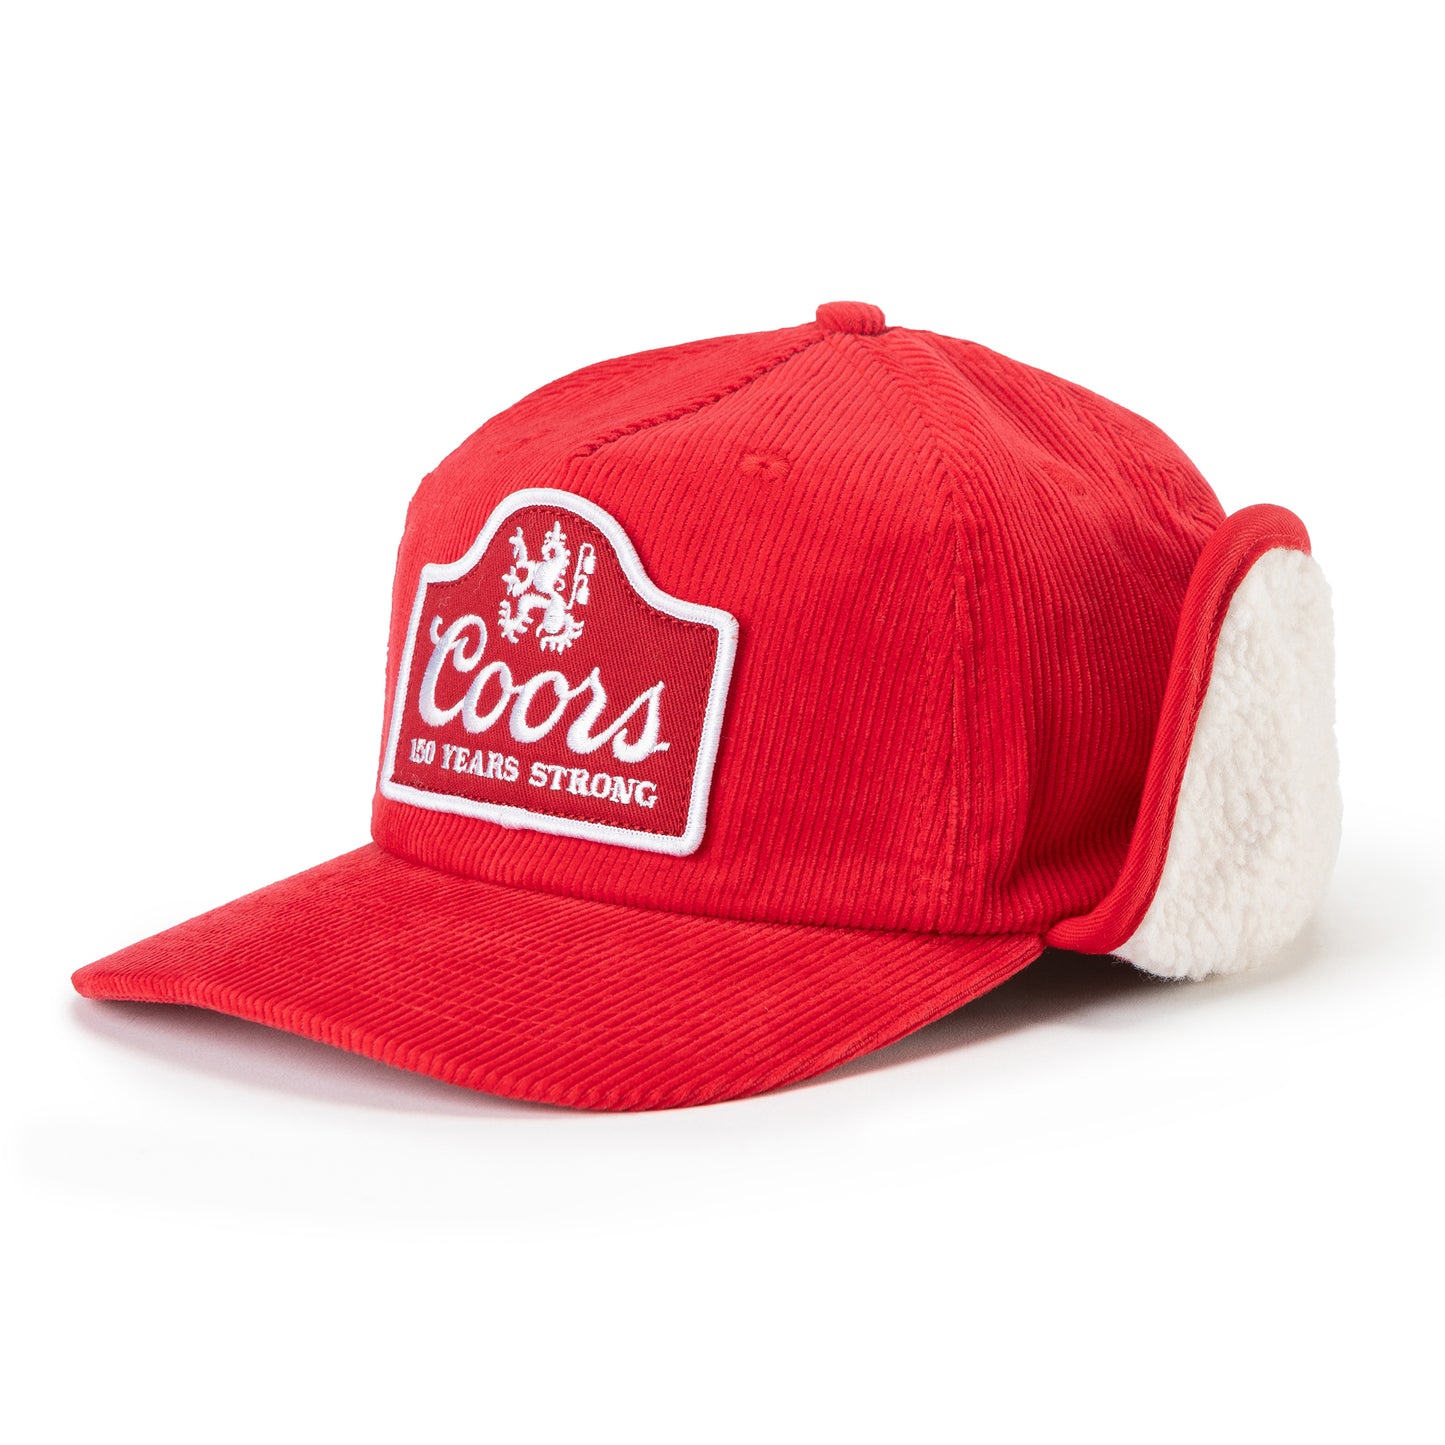 Coors x Seager Flapjack Hat